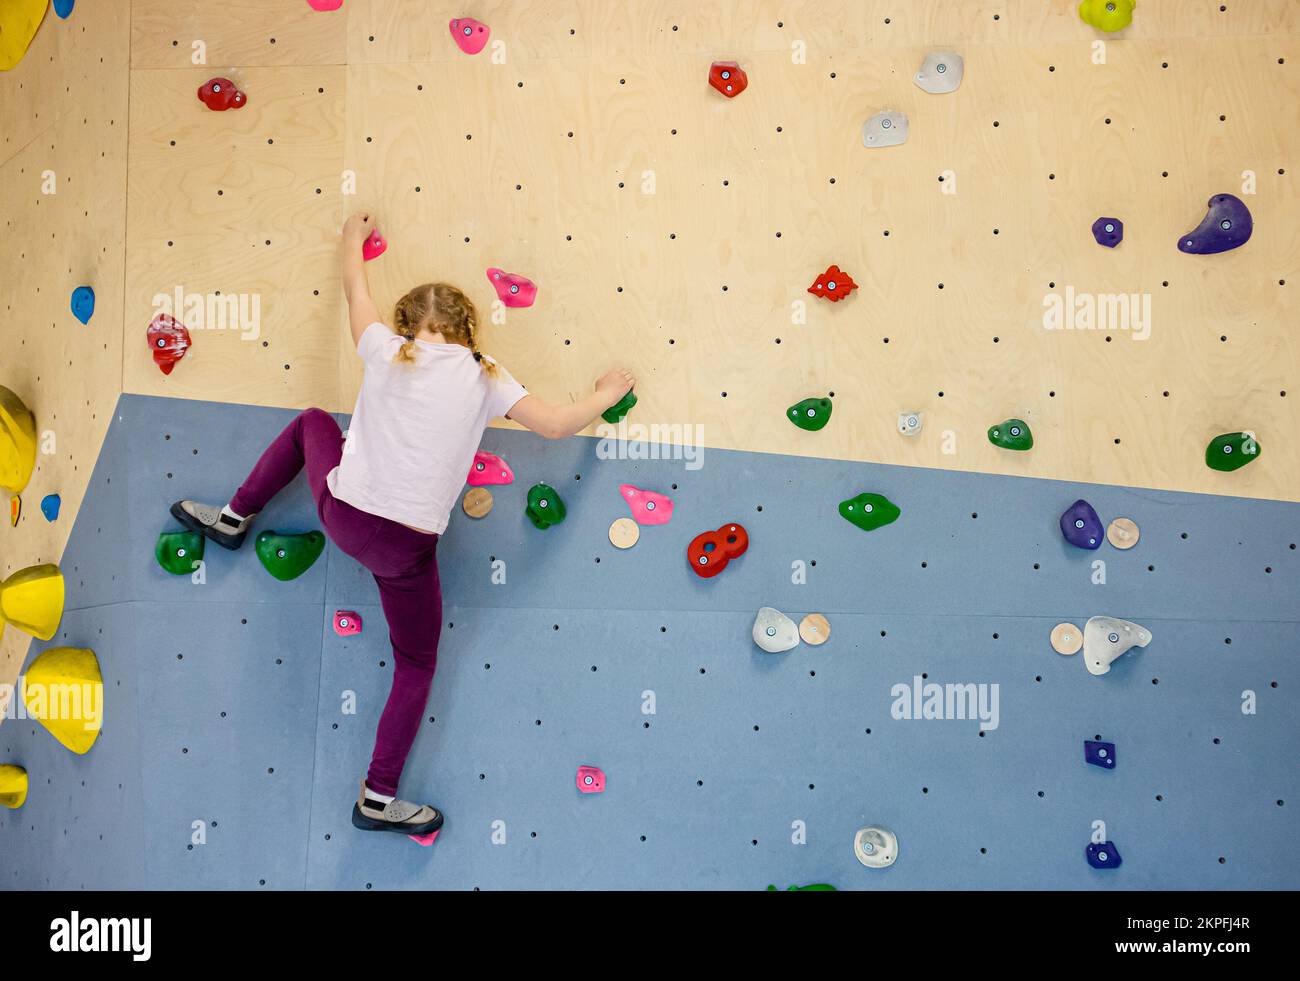 Sporty strong young woman in black outfit exercising in boulder climbing  hall reaching new results, enjoying new challenges Stock Photo - Alamy